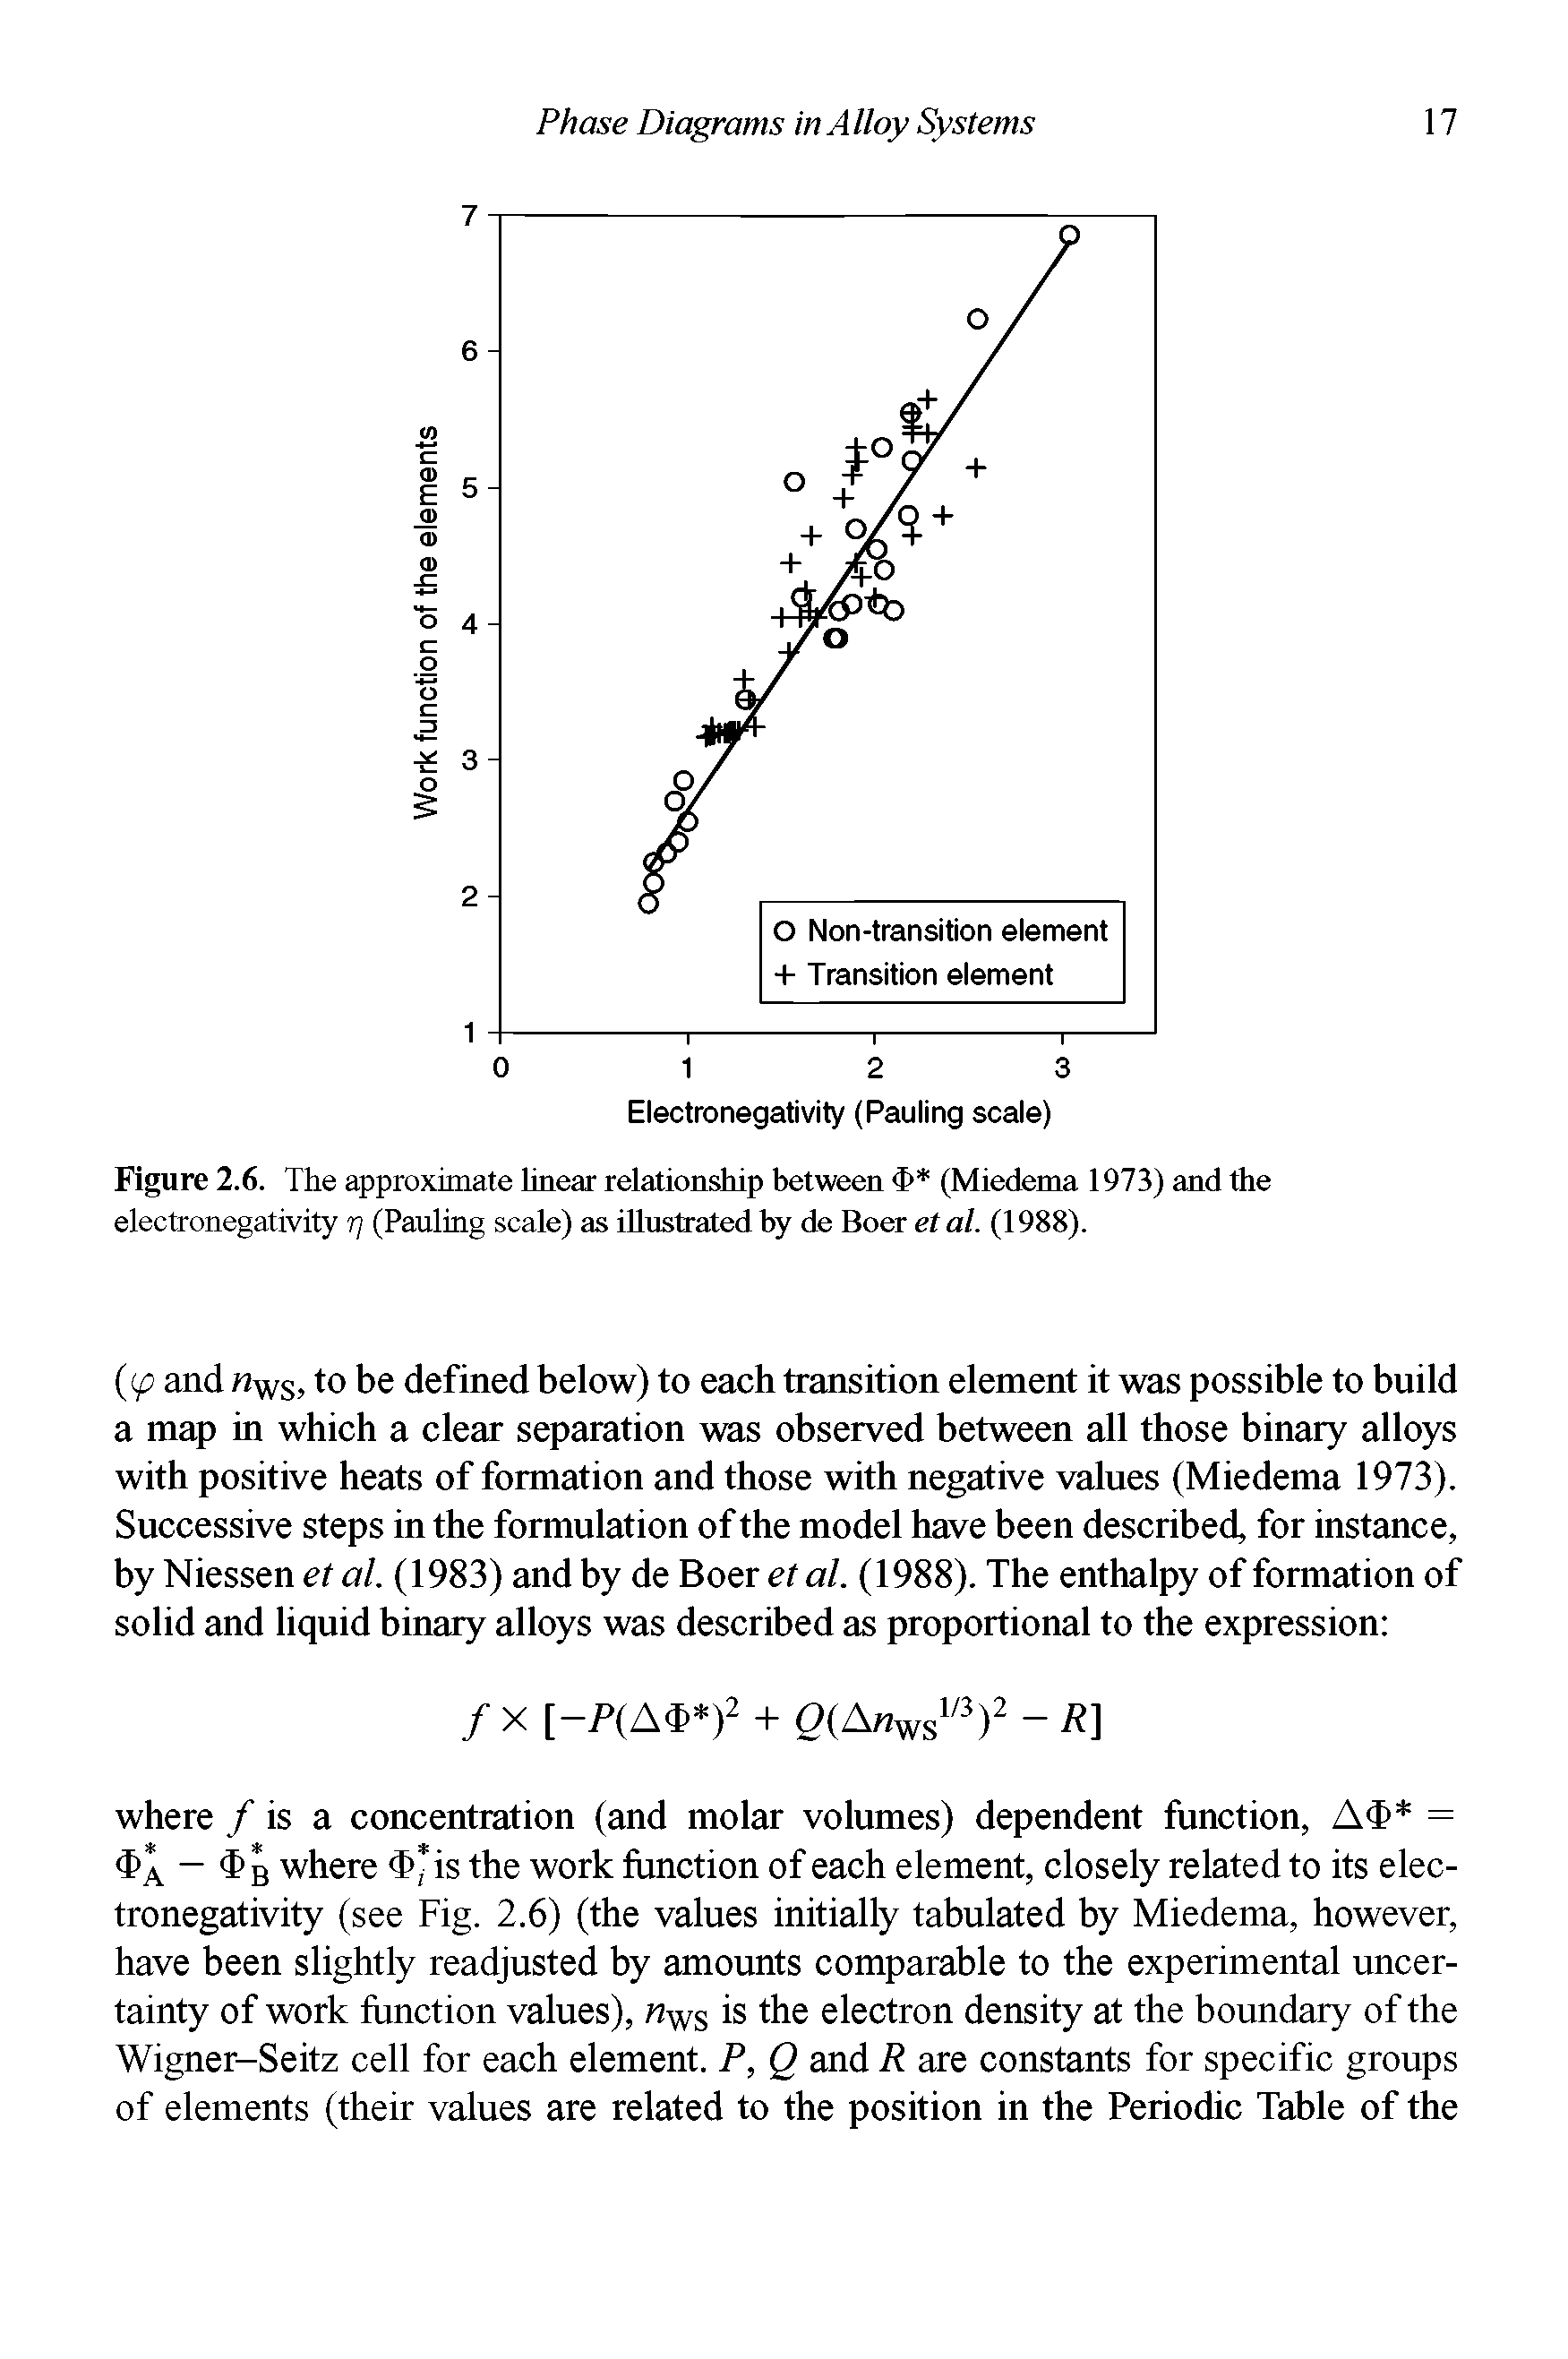 Figure 2.6. The approximate linear relationship between <T> (Miedema 1973) and the electronegativity r) (Pauling scale) as illustrated by de Boer et al. (1988).